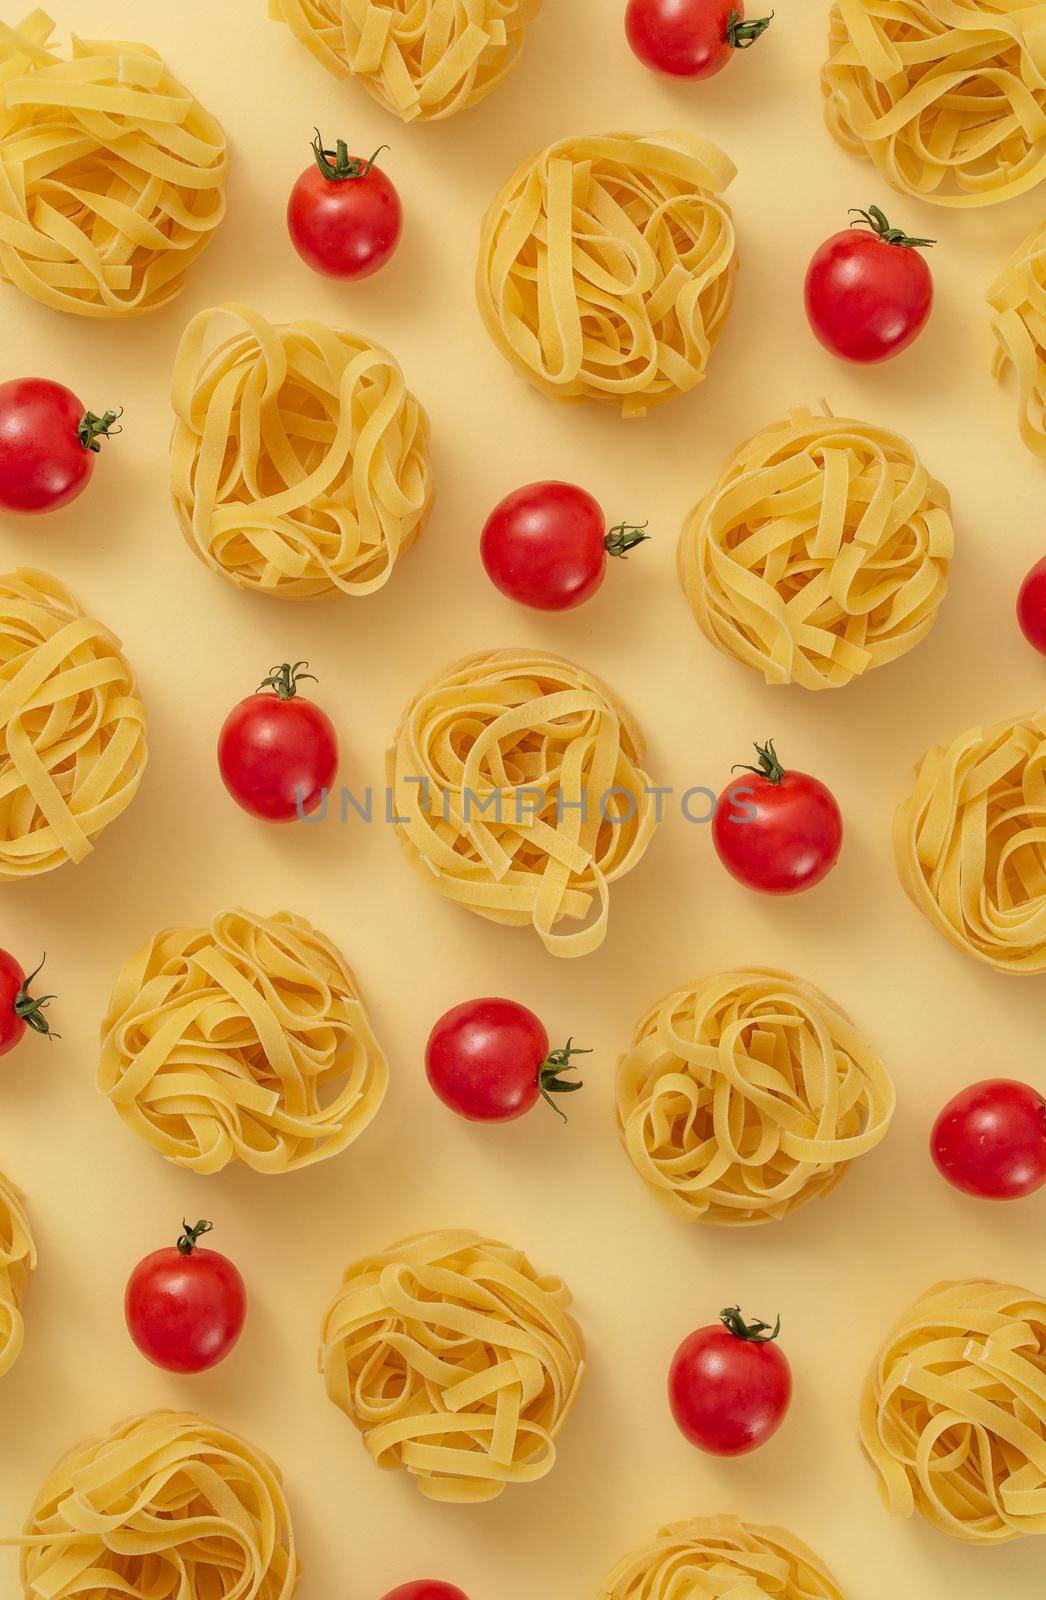 Minimal food pattern of tagliatelle and tomatoes, light yellow pastel background. Traditional Italian pasta in modern pop art style. Pasta and tomatoes, Italian cuisine concept. Top view, flat lay